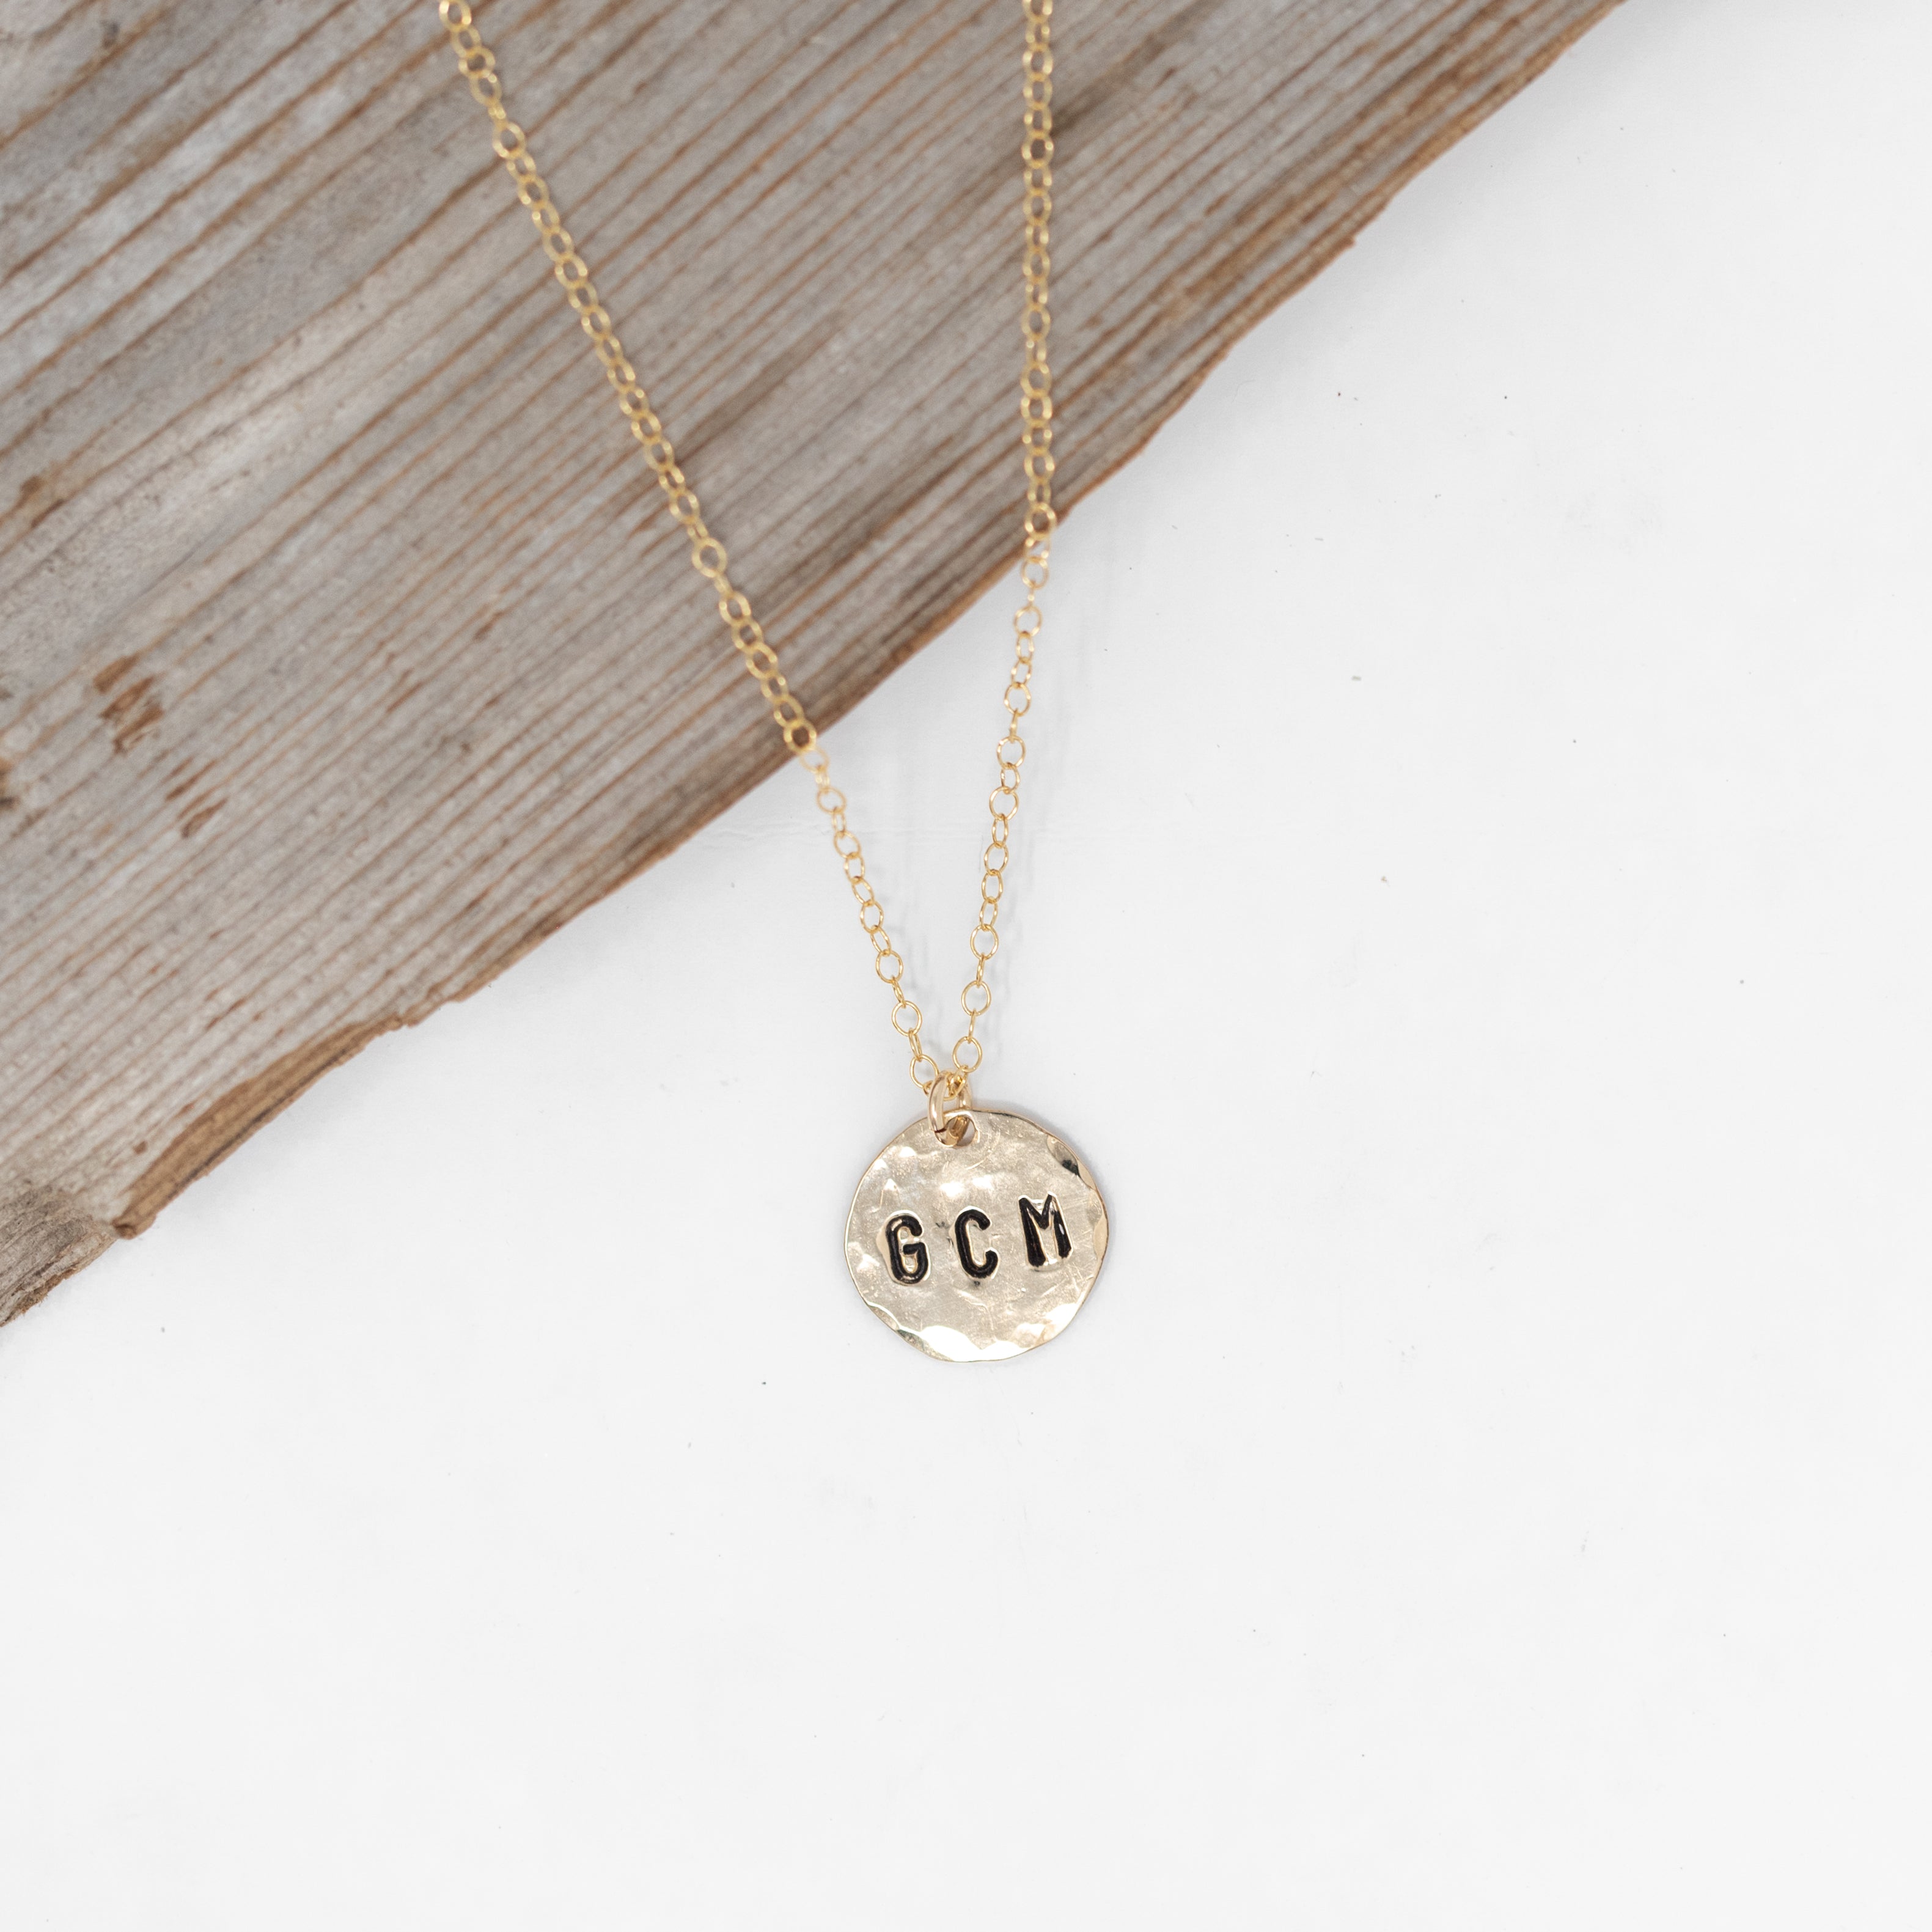 Medium size gold filled hammered circle with initials stamped onto it. On a gold chain.  